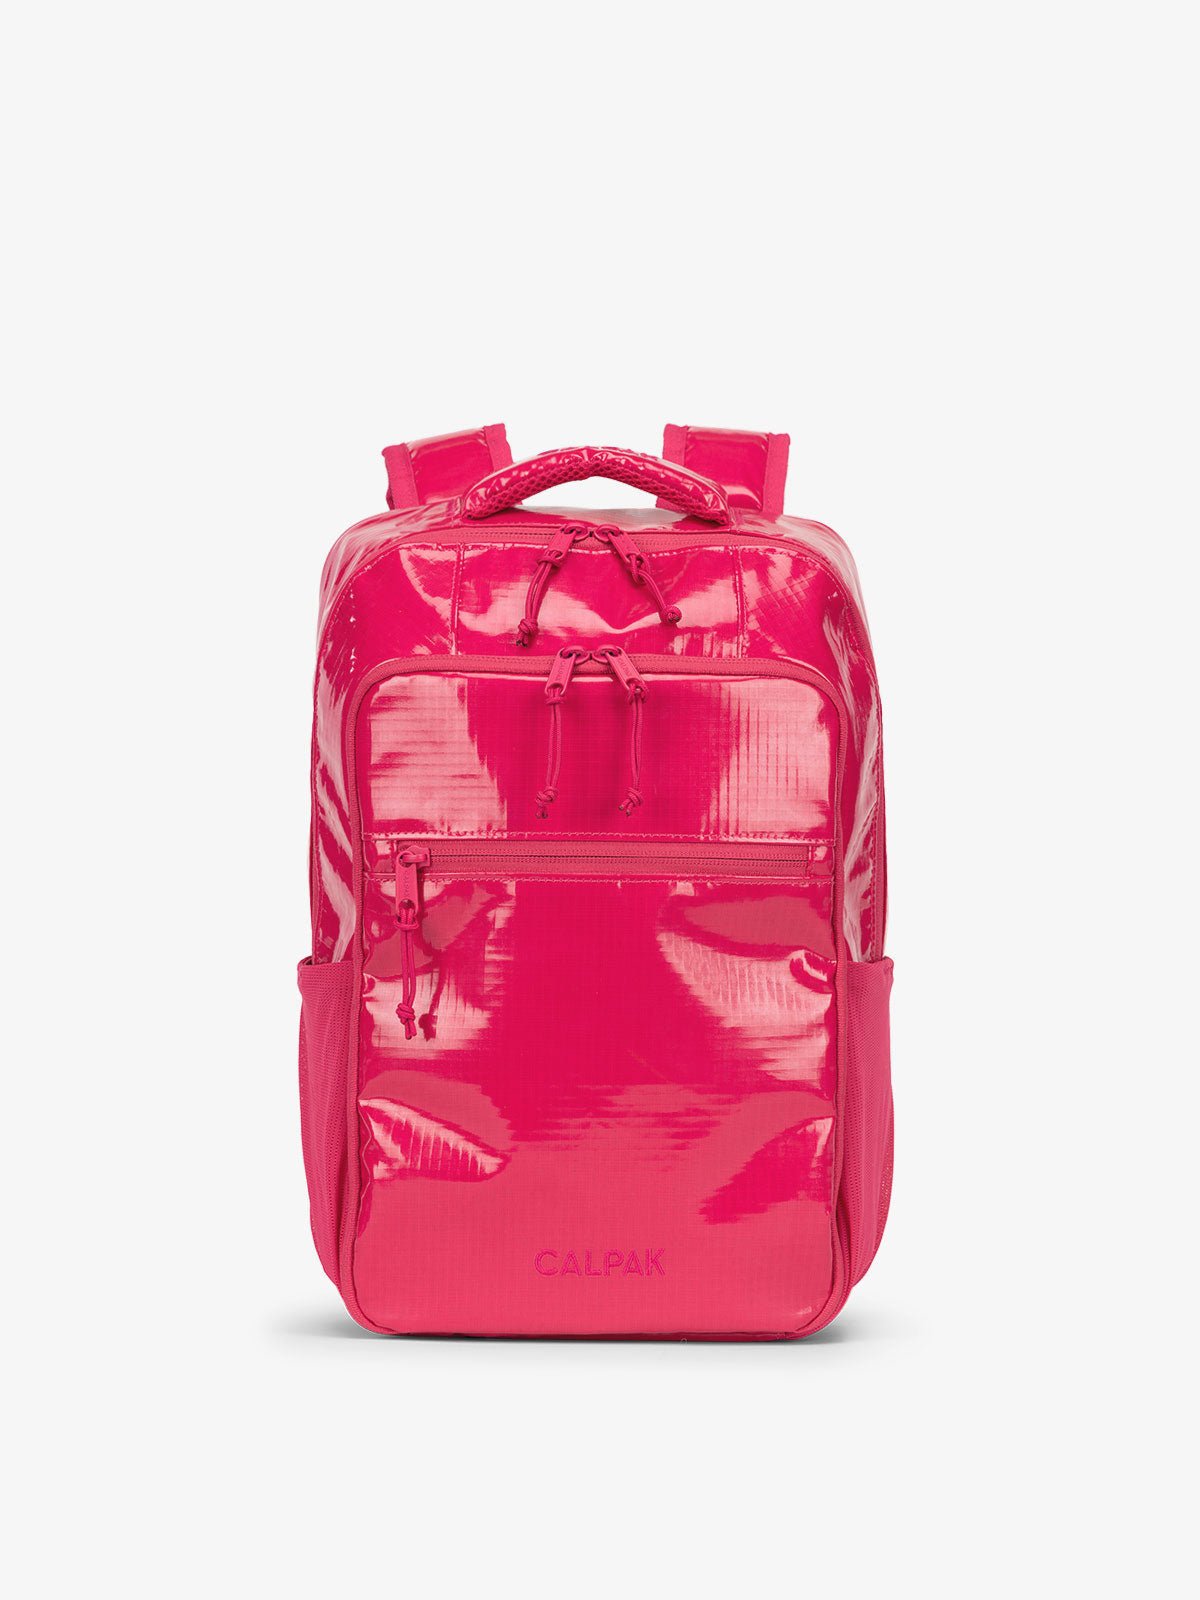 Front view of CALPAK Terra Hydration Backpack in pink dragonfruit